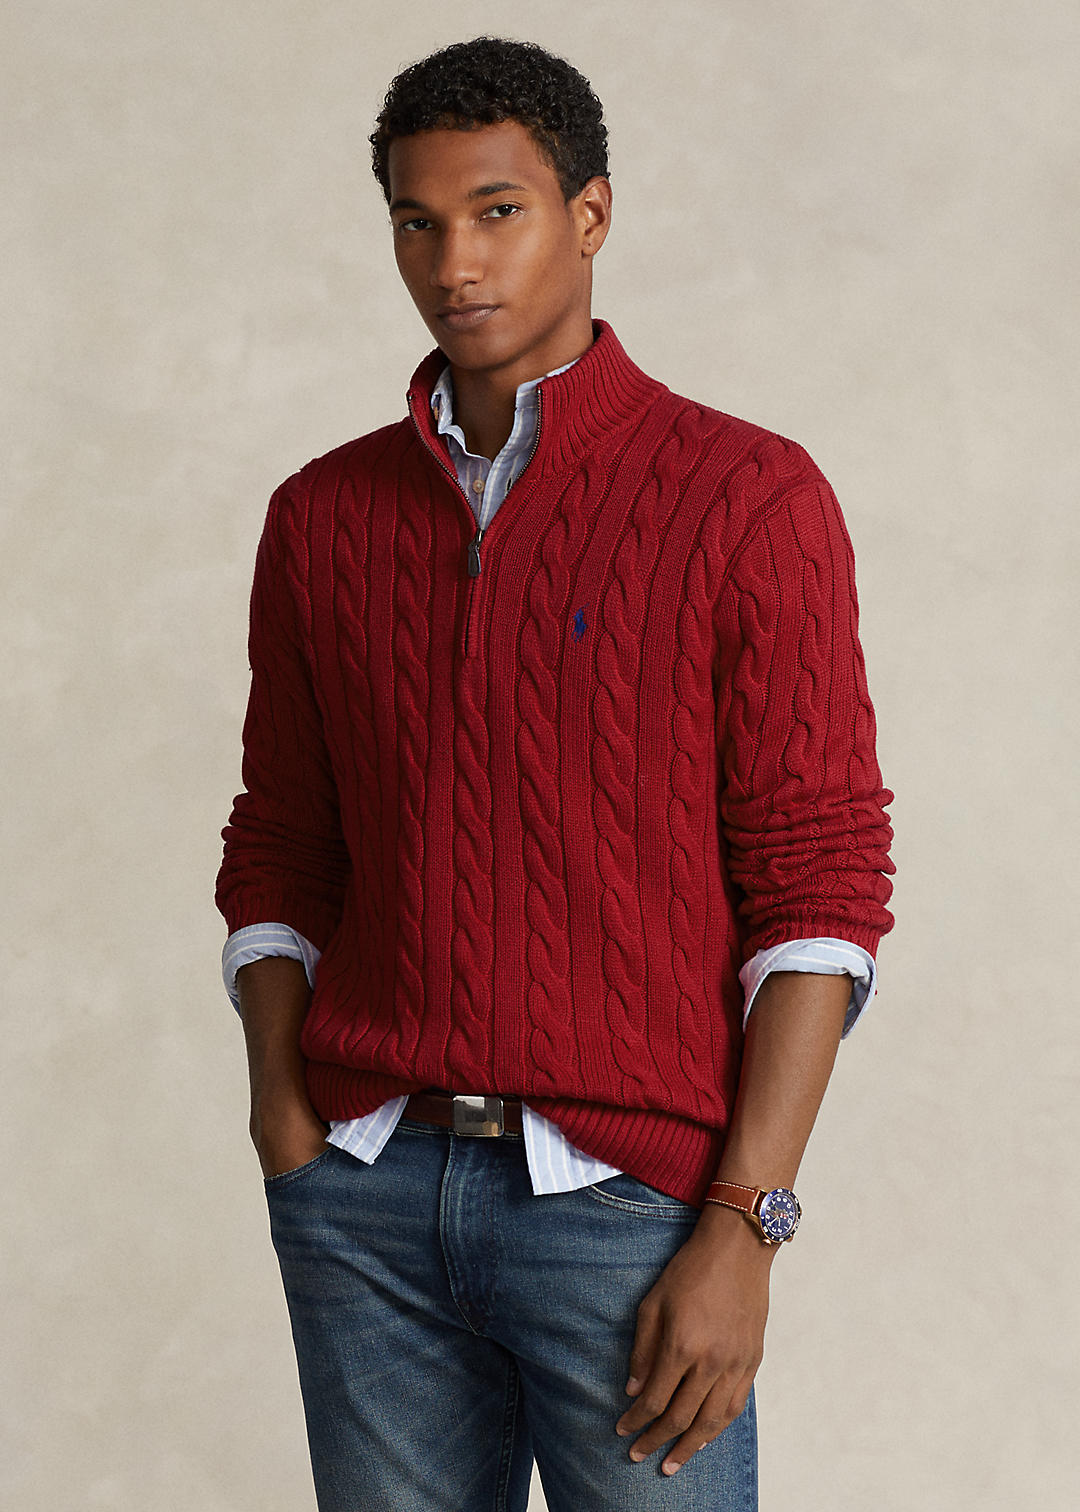 Mens Sweaters and knitwear Polo Ralph Lauren Sweaters and knitwear Polo Ralph Lauren Cotton Sweaters in Red for Men 